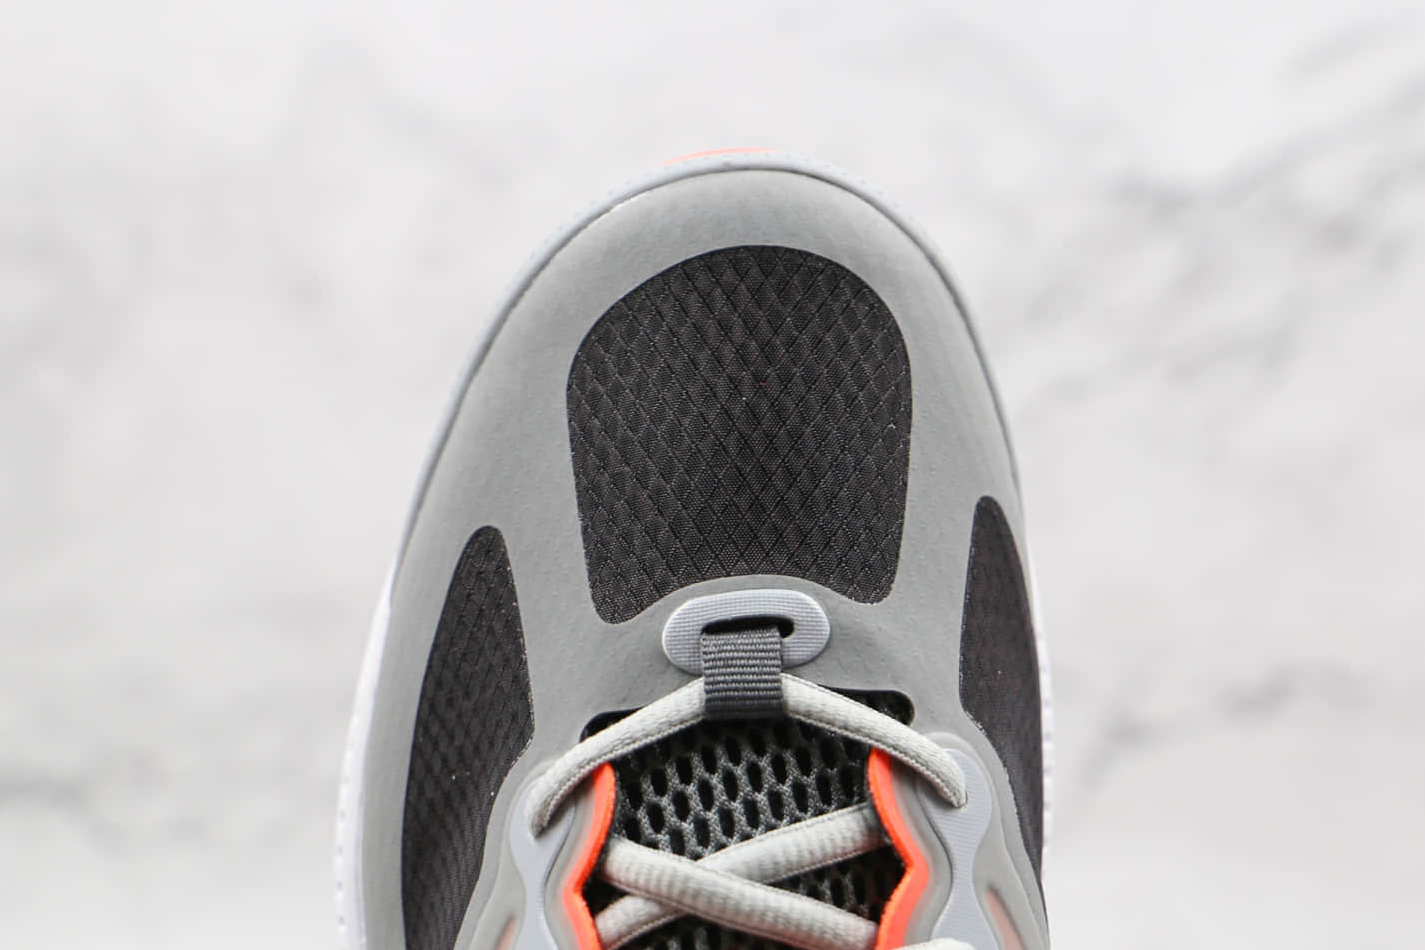 Nike Air Max Genome 'Light Smoke Grey Bright Mango' CW1648-004 - Stylish and Versatile Sneakers for Men and Women